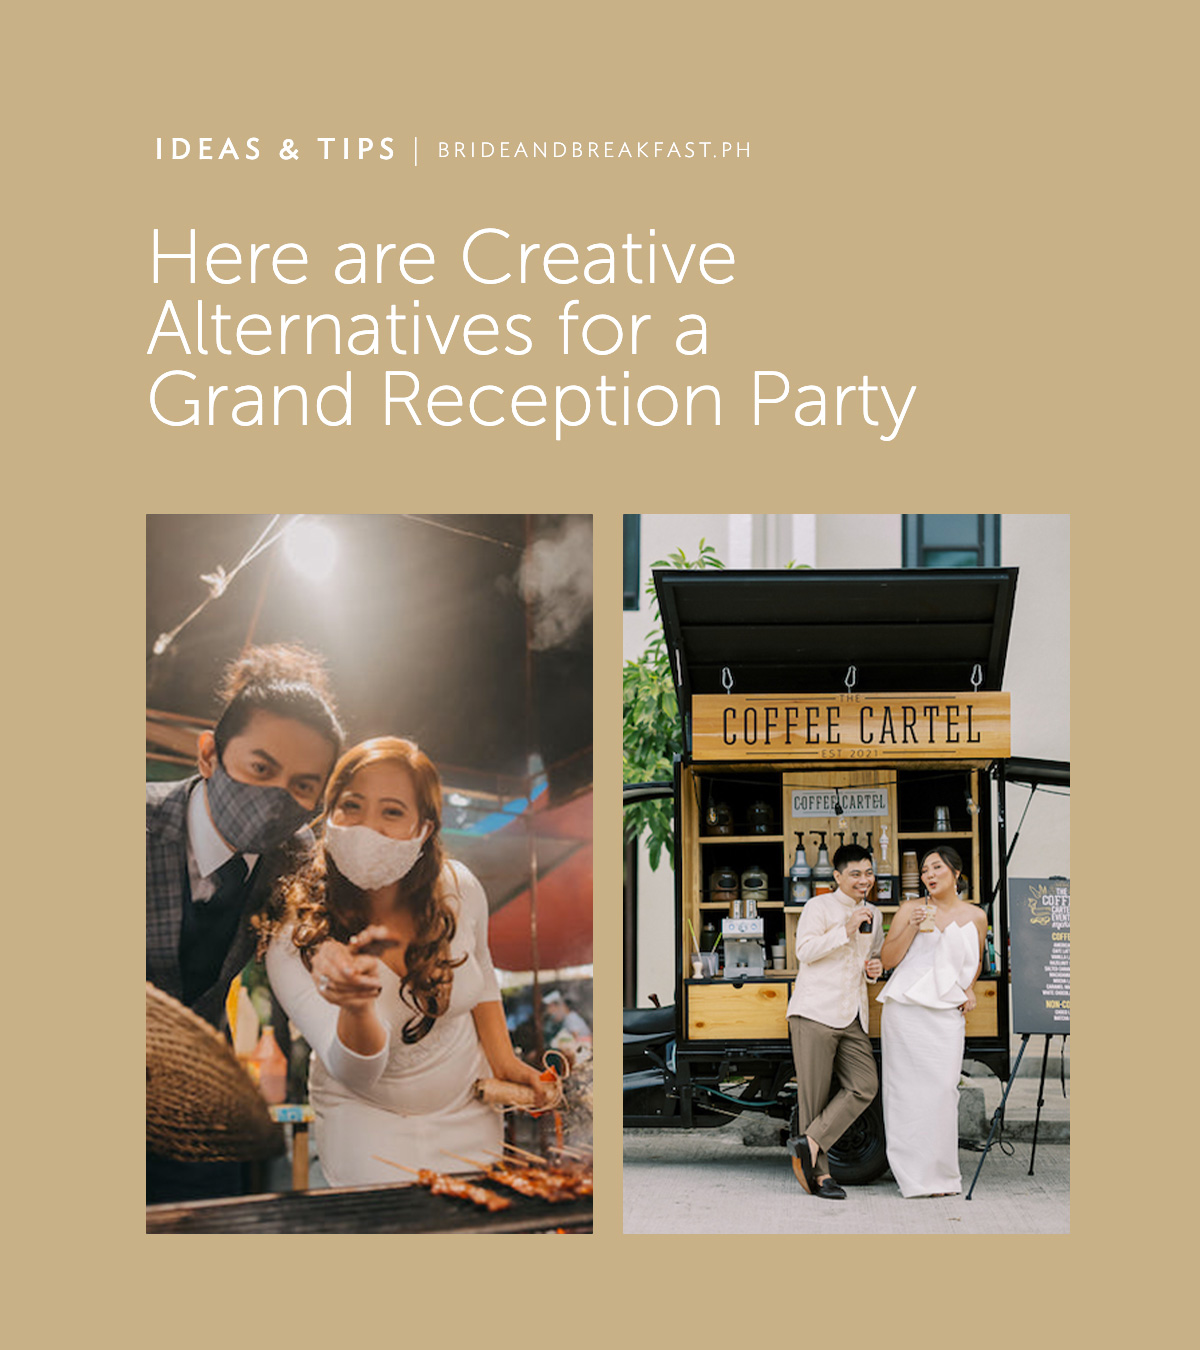 Here are Creative Alternatives for a Grand Reception Party